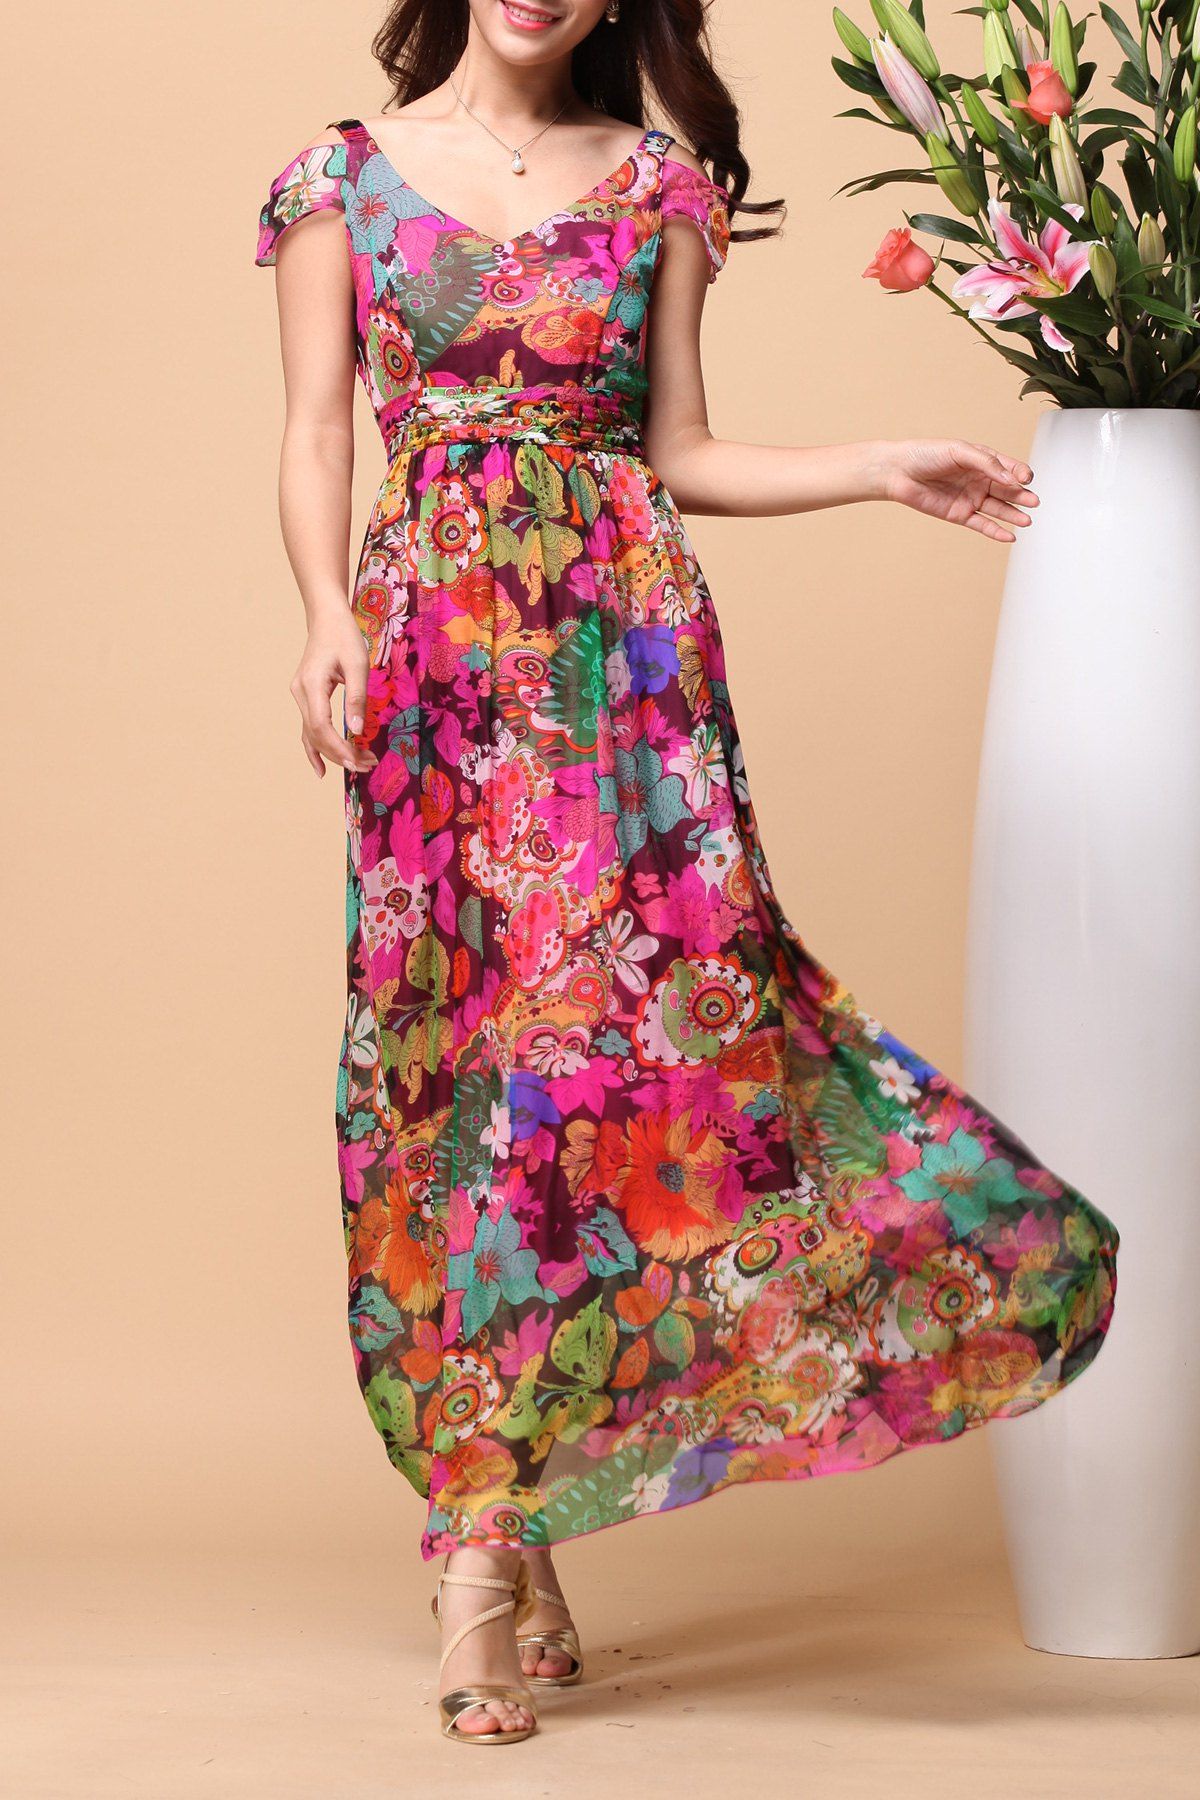 Backless Floral Maxi Swing Summer Dress